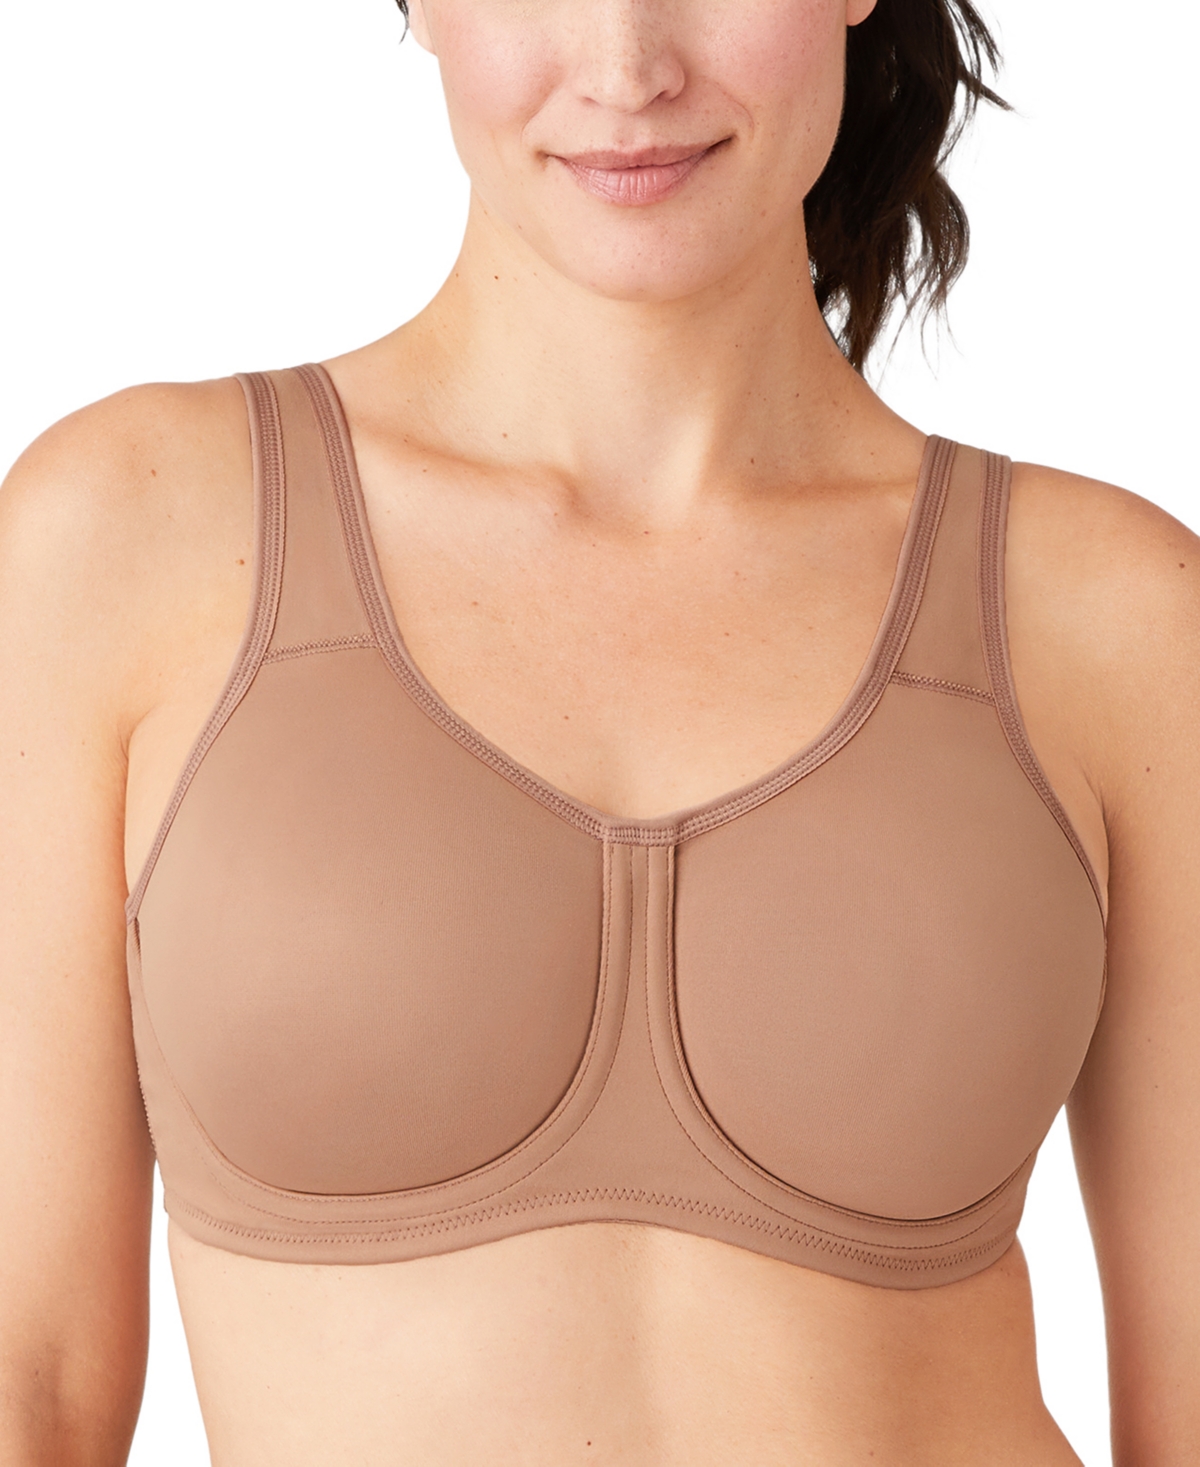 WACOAL SPORT HIGH-IMPACT UNDERWIRE BRA 855170, UP TO I CUP